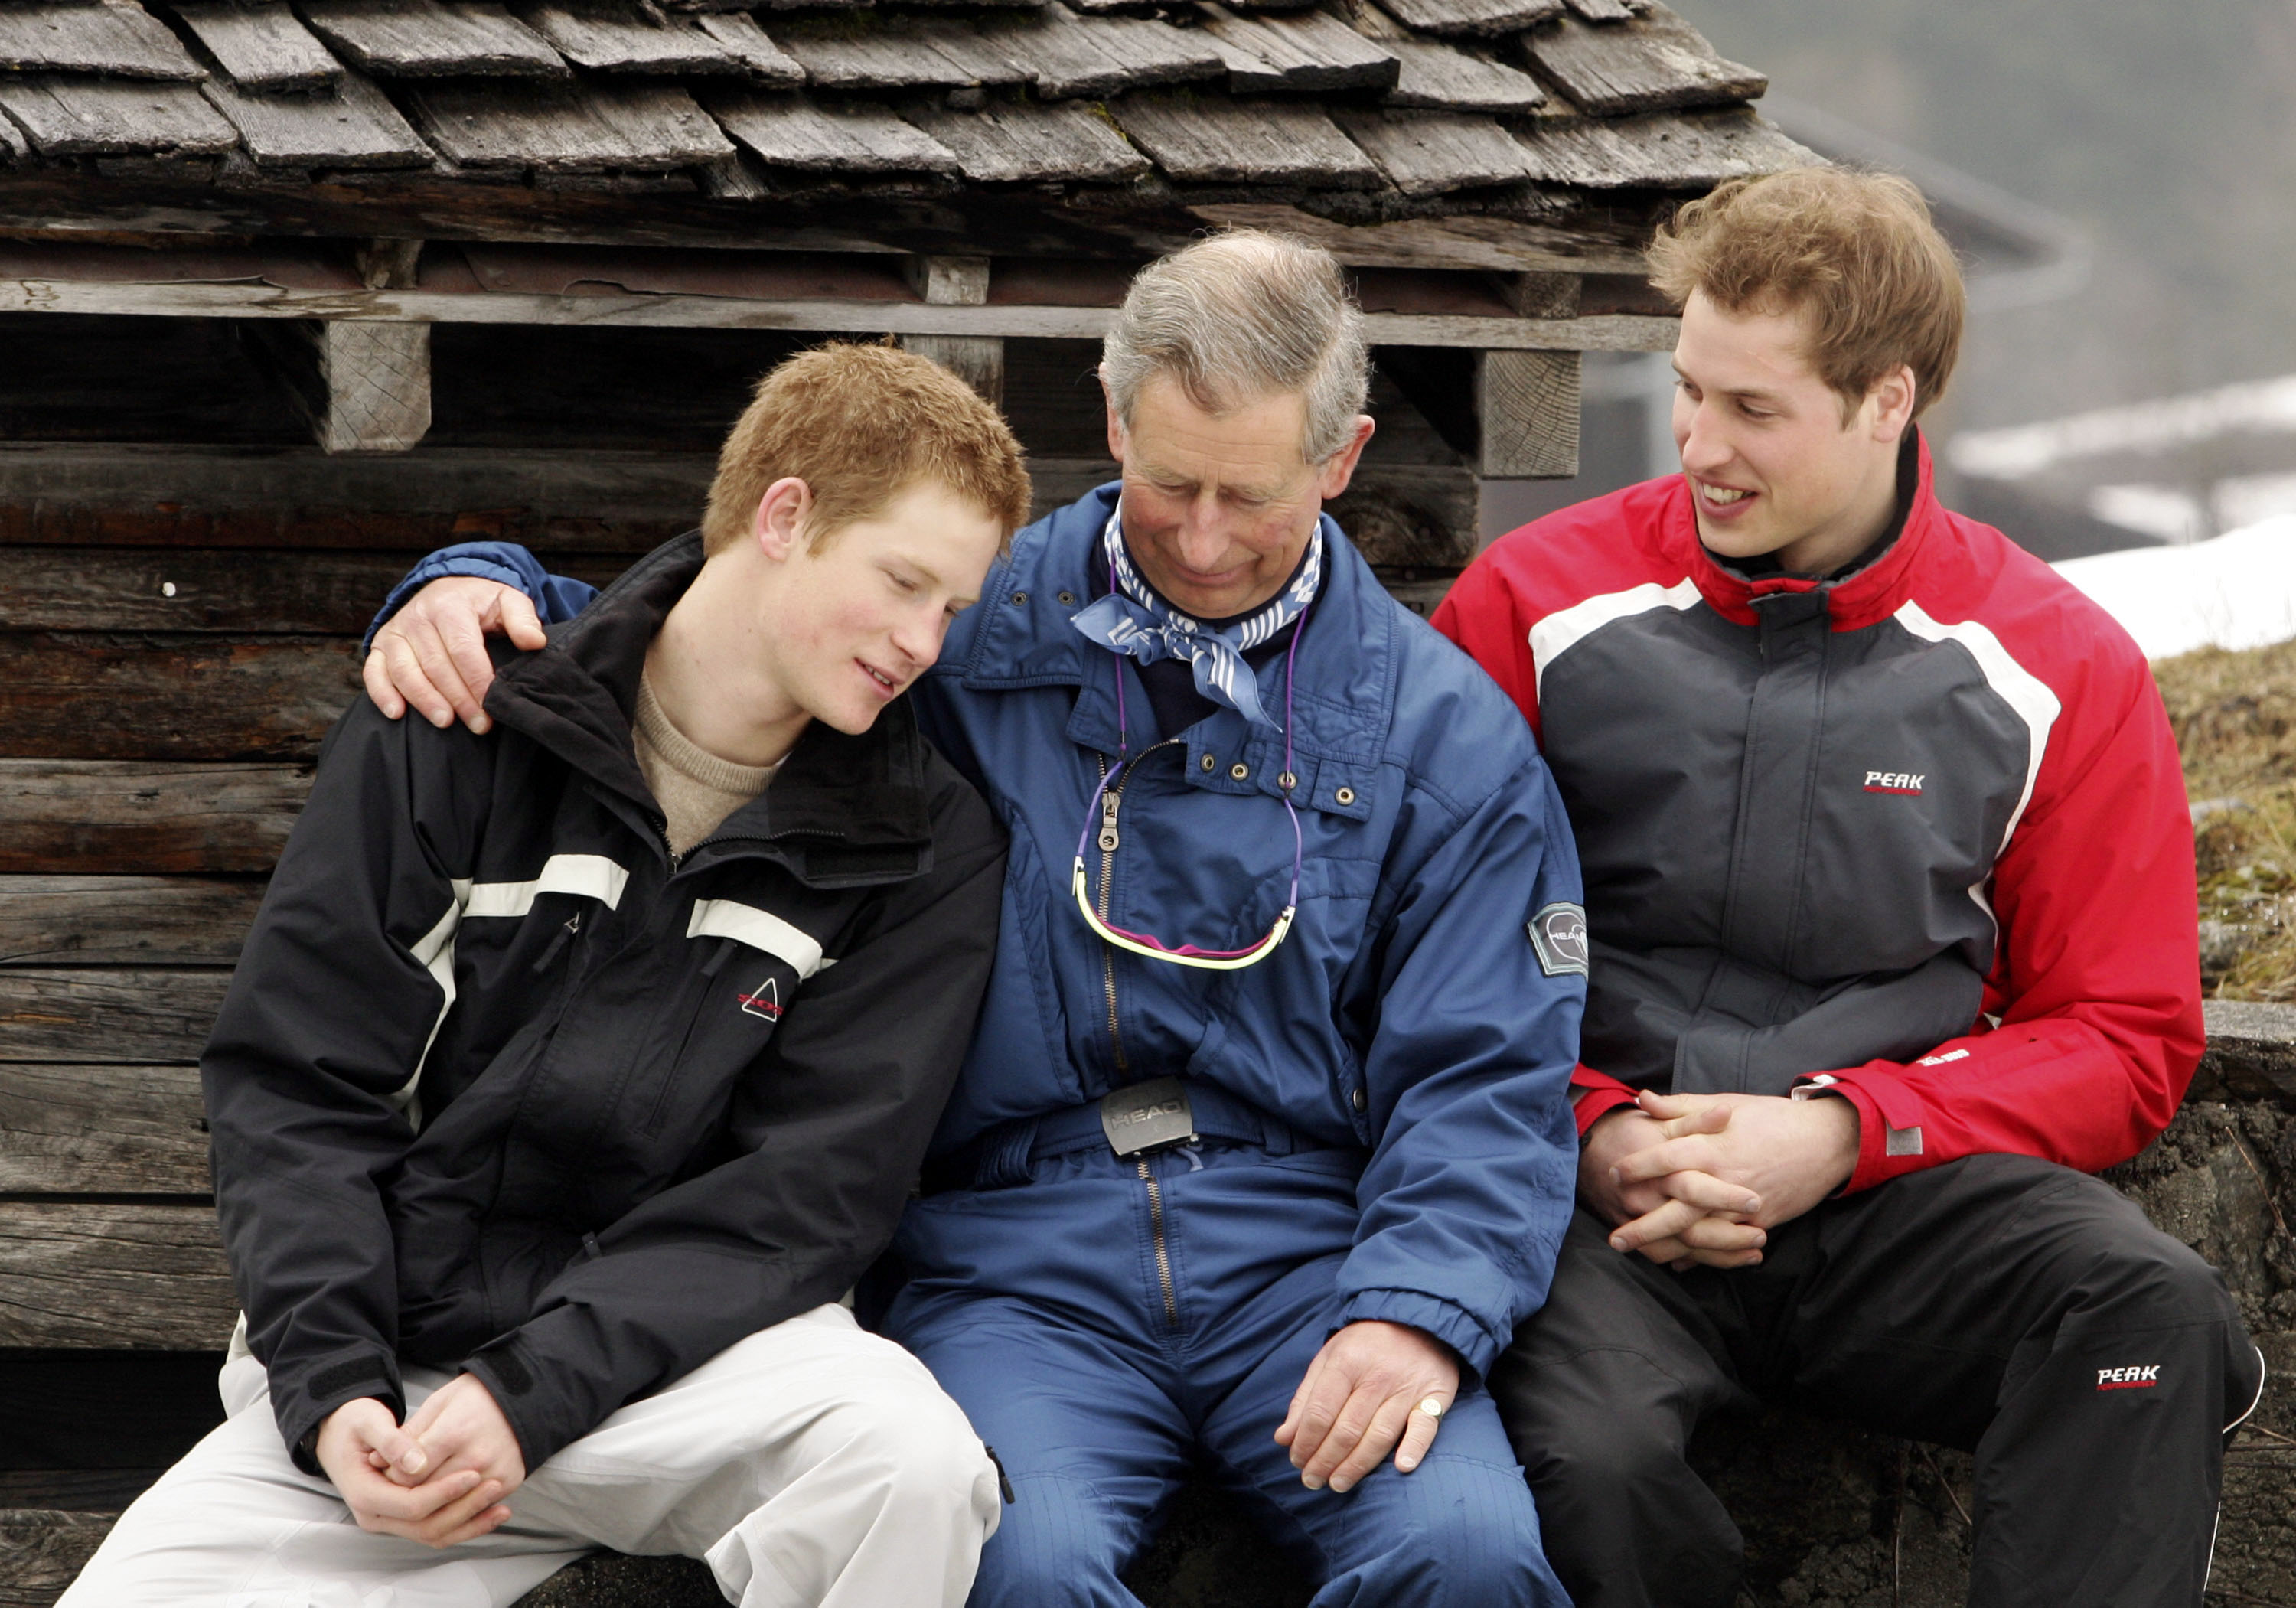 Prince Harry, Prince Charles, and Prince William during a photocall on the Royal Family's ski break on March 31, 2005 in Switzerland | Source: Getty Images